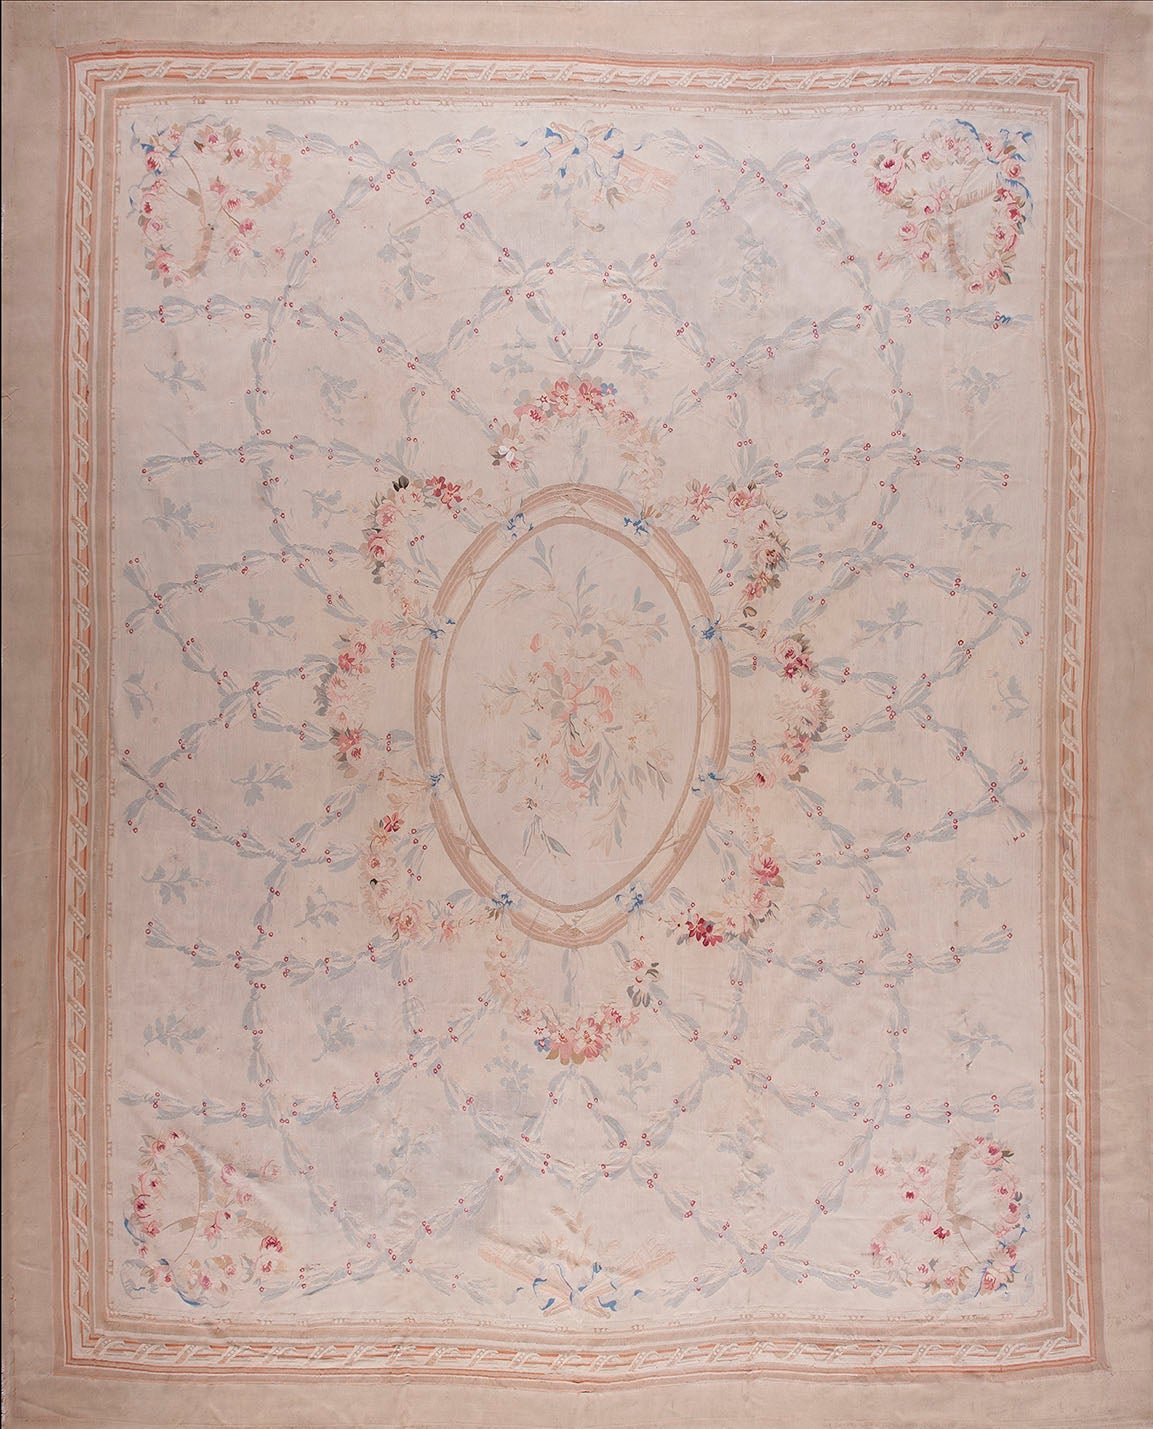 Late 19th Century French Aubusson Carpet ( 11'8" x 14'3" - 355 x 434 cm )   For Sale